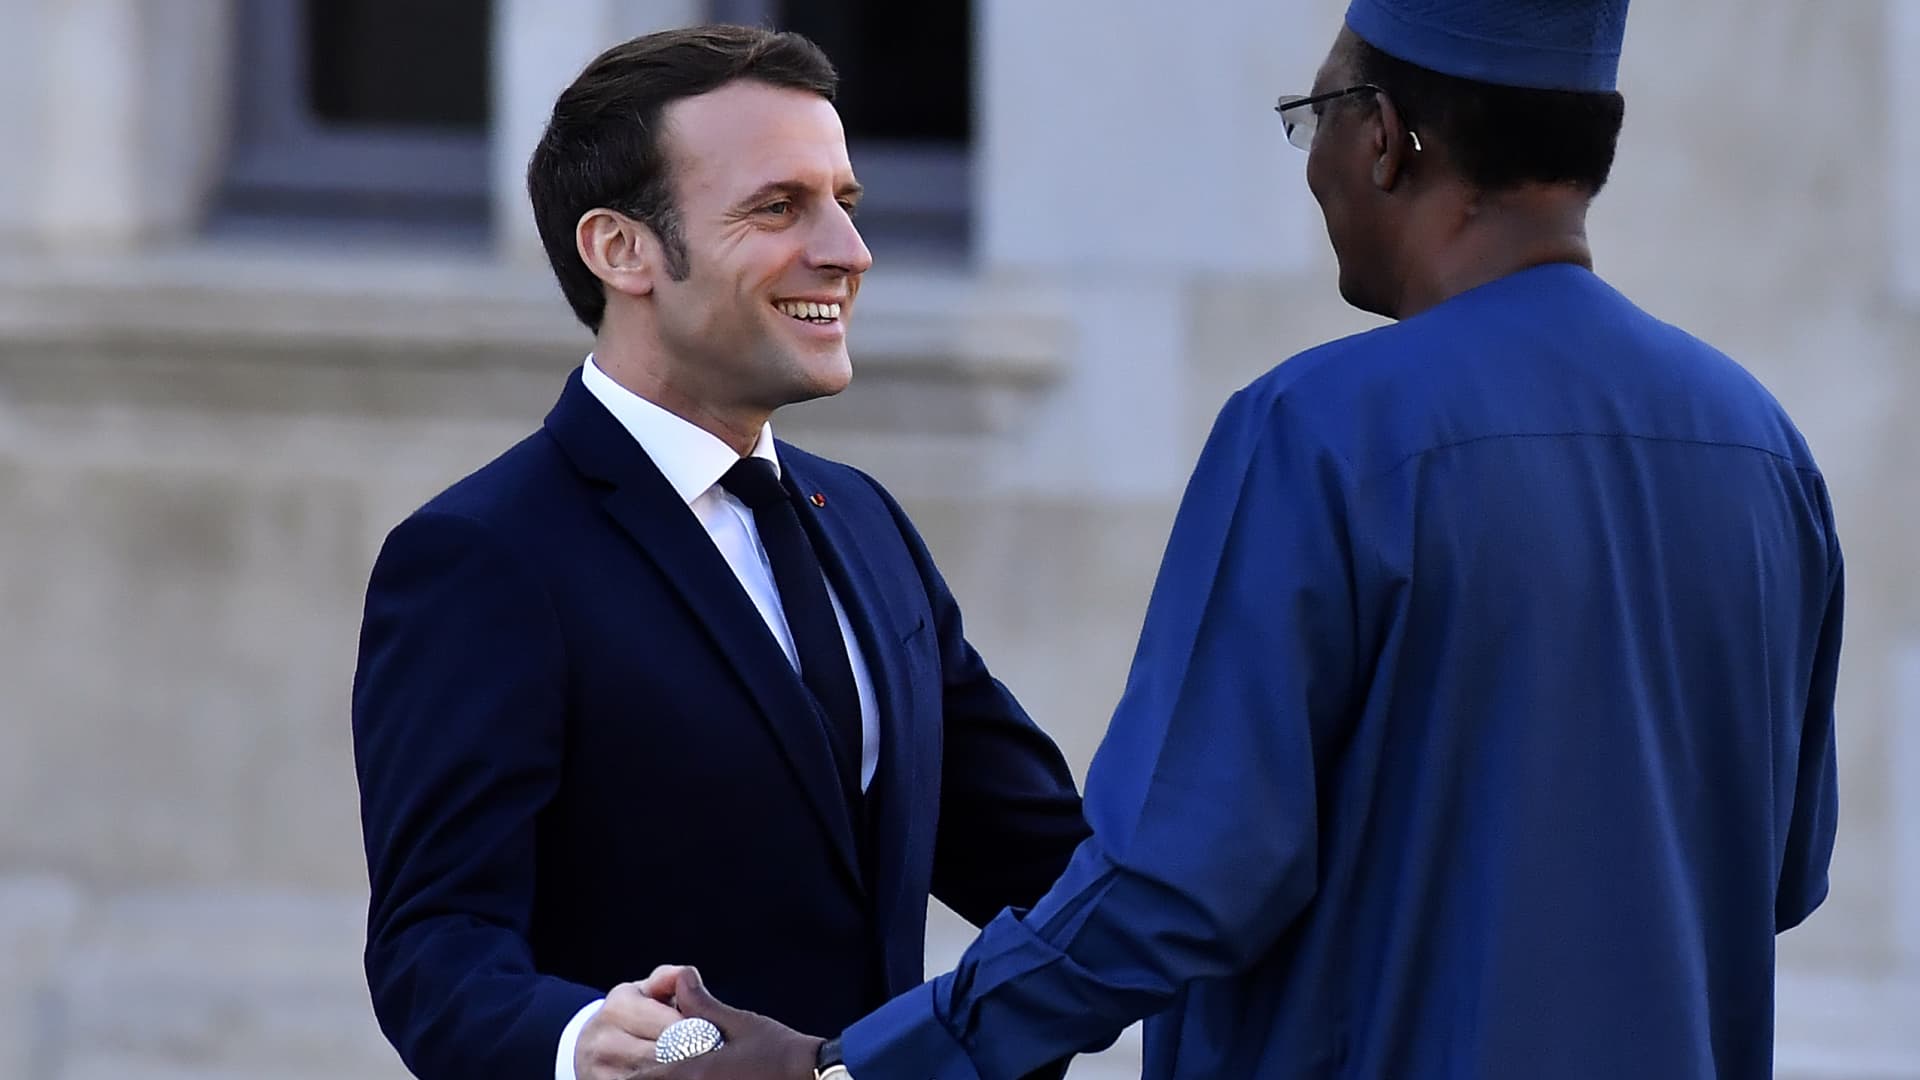 PAU, France - French President Emmanuel Macron (L) welcomes Chad's President Idriss Deby prior to a summit on the situation in the Sahel region in the southern French city of Pau on January 13, 2020.